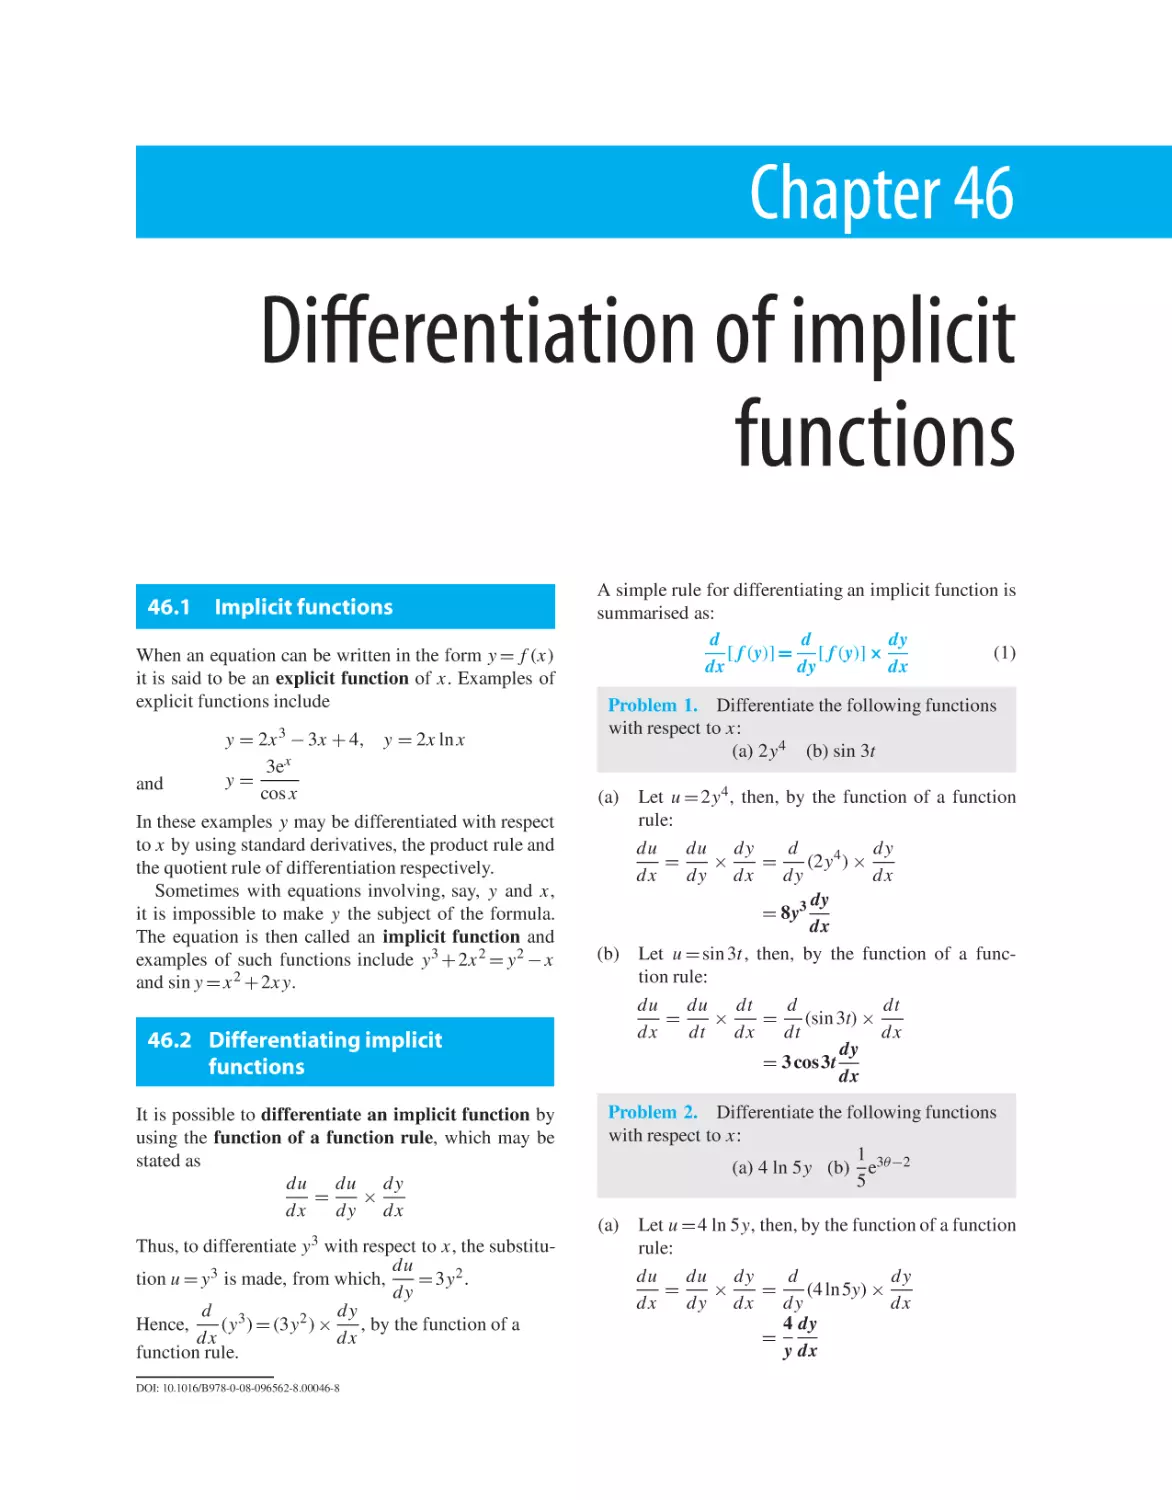 Chapter 46. Differentiation of implicit functions
46.1 Implicit functions
46.2 Differentiating implicit functions